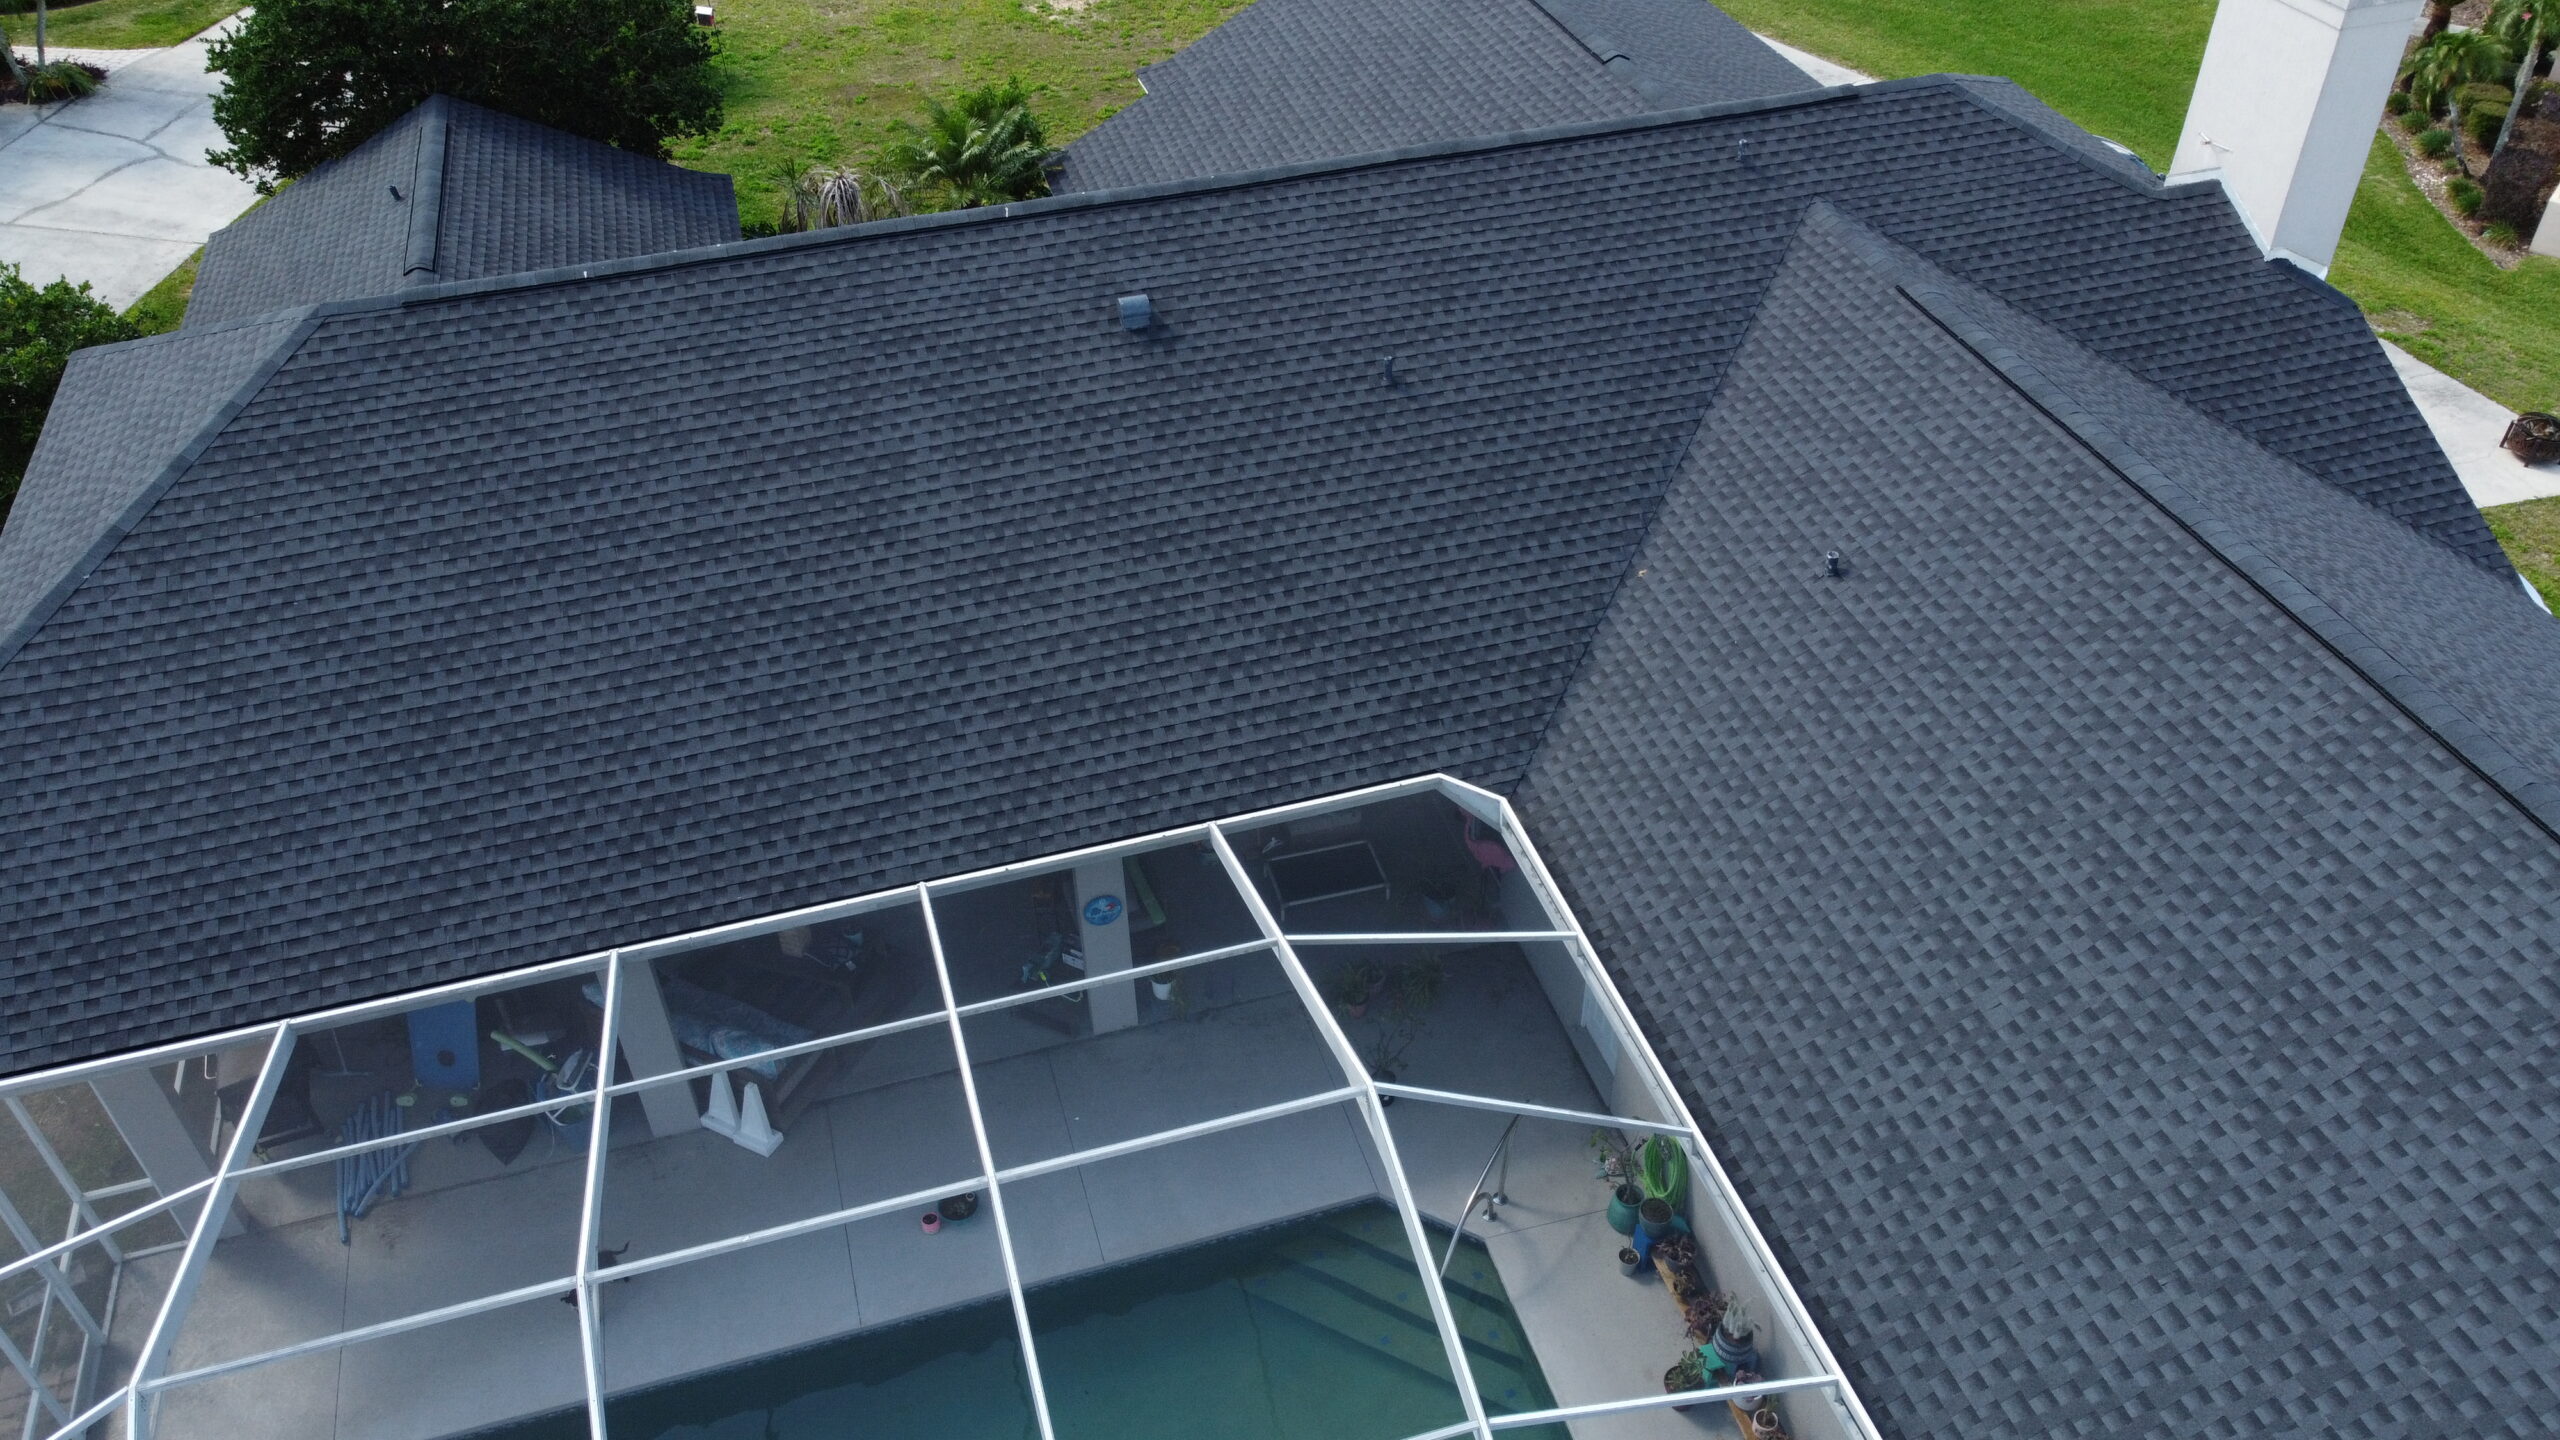 Newly replaced shingle roof in color black